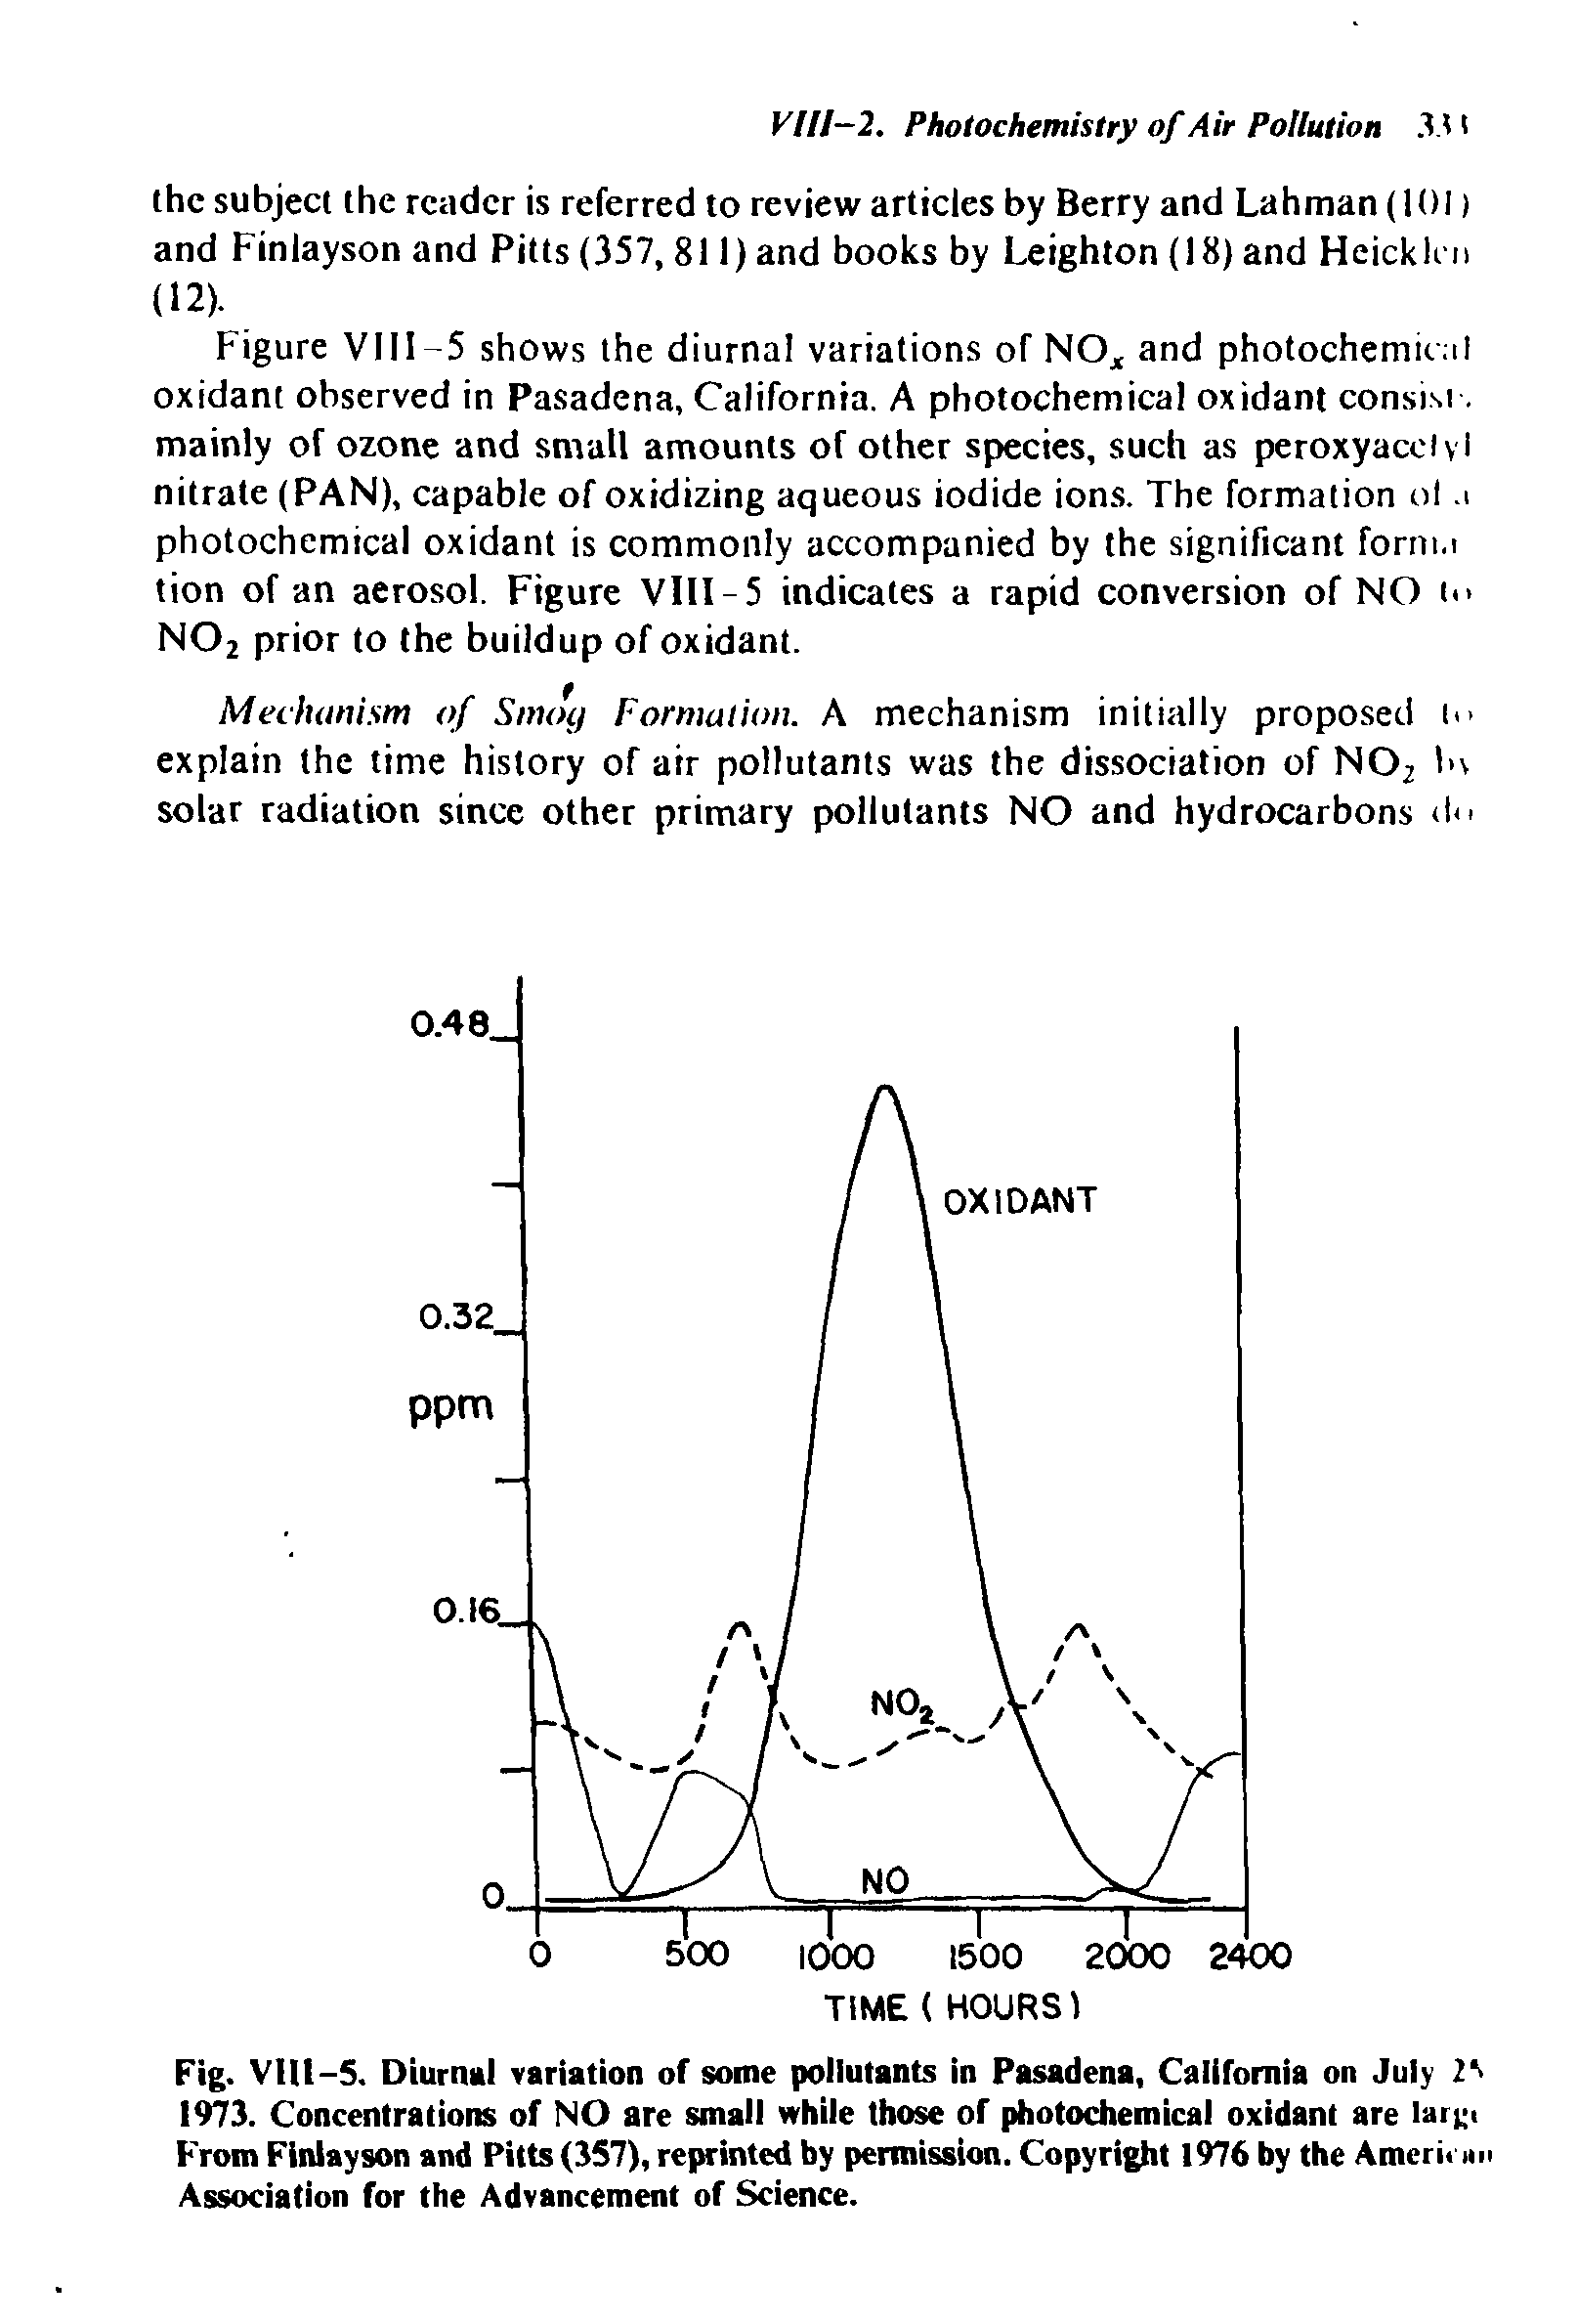 Figure VIII-5 shows the diurnal variations of NO and photochemical oxidant observed in Pasadena, California. A photochemical oxidant consisi. mainly of ozone and small amounts of other species, such as peroxyaceiyl nitrate (PAN), capable of oxidizing aqueous iodide ions. The formation ol a photochemical oxidant is commonly accompanied by the significant forma tion of an aerosol. Figure VIII-5 indicates a rapid conversion of NO i<> N02 prior to the buildup of oxidant.